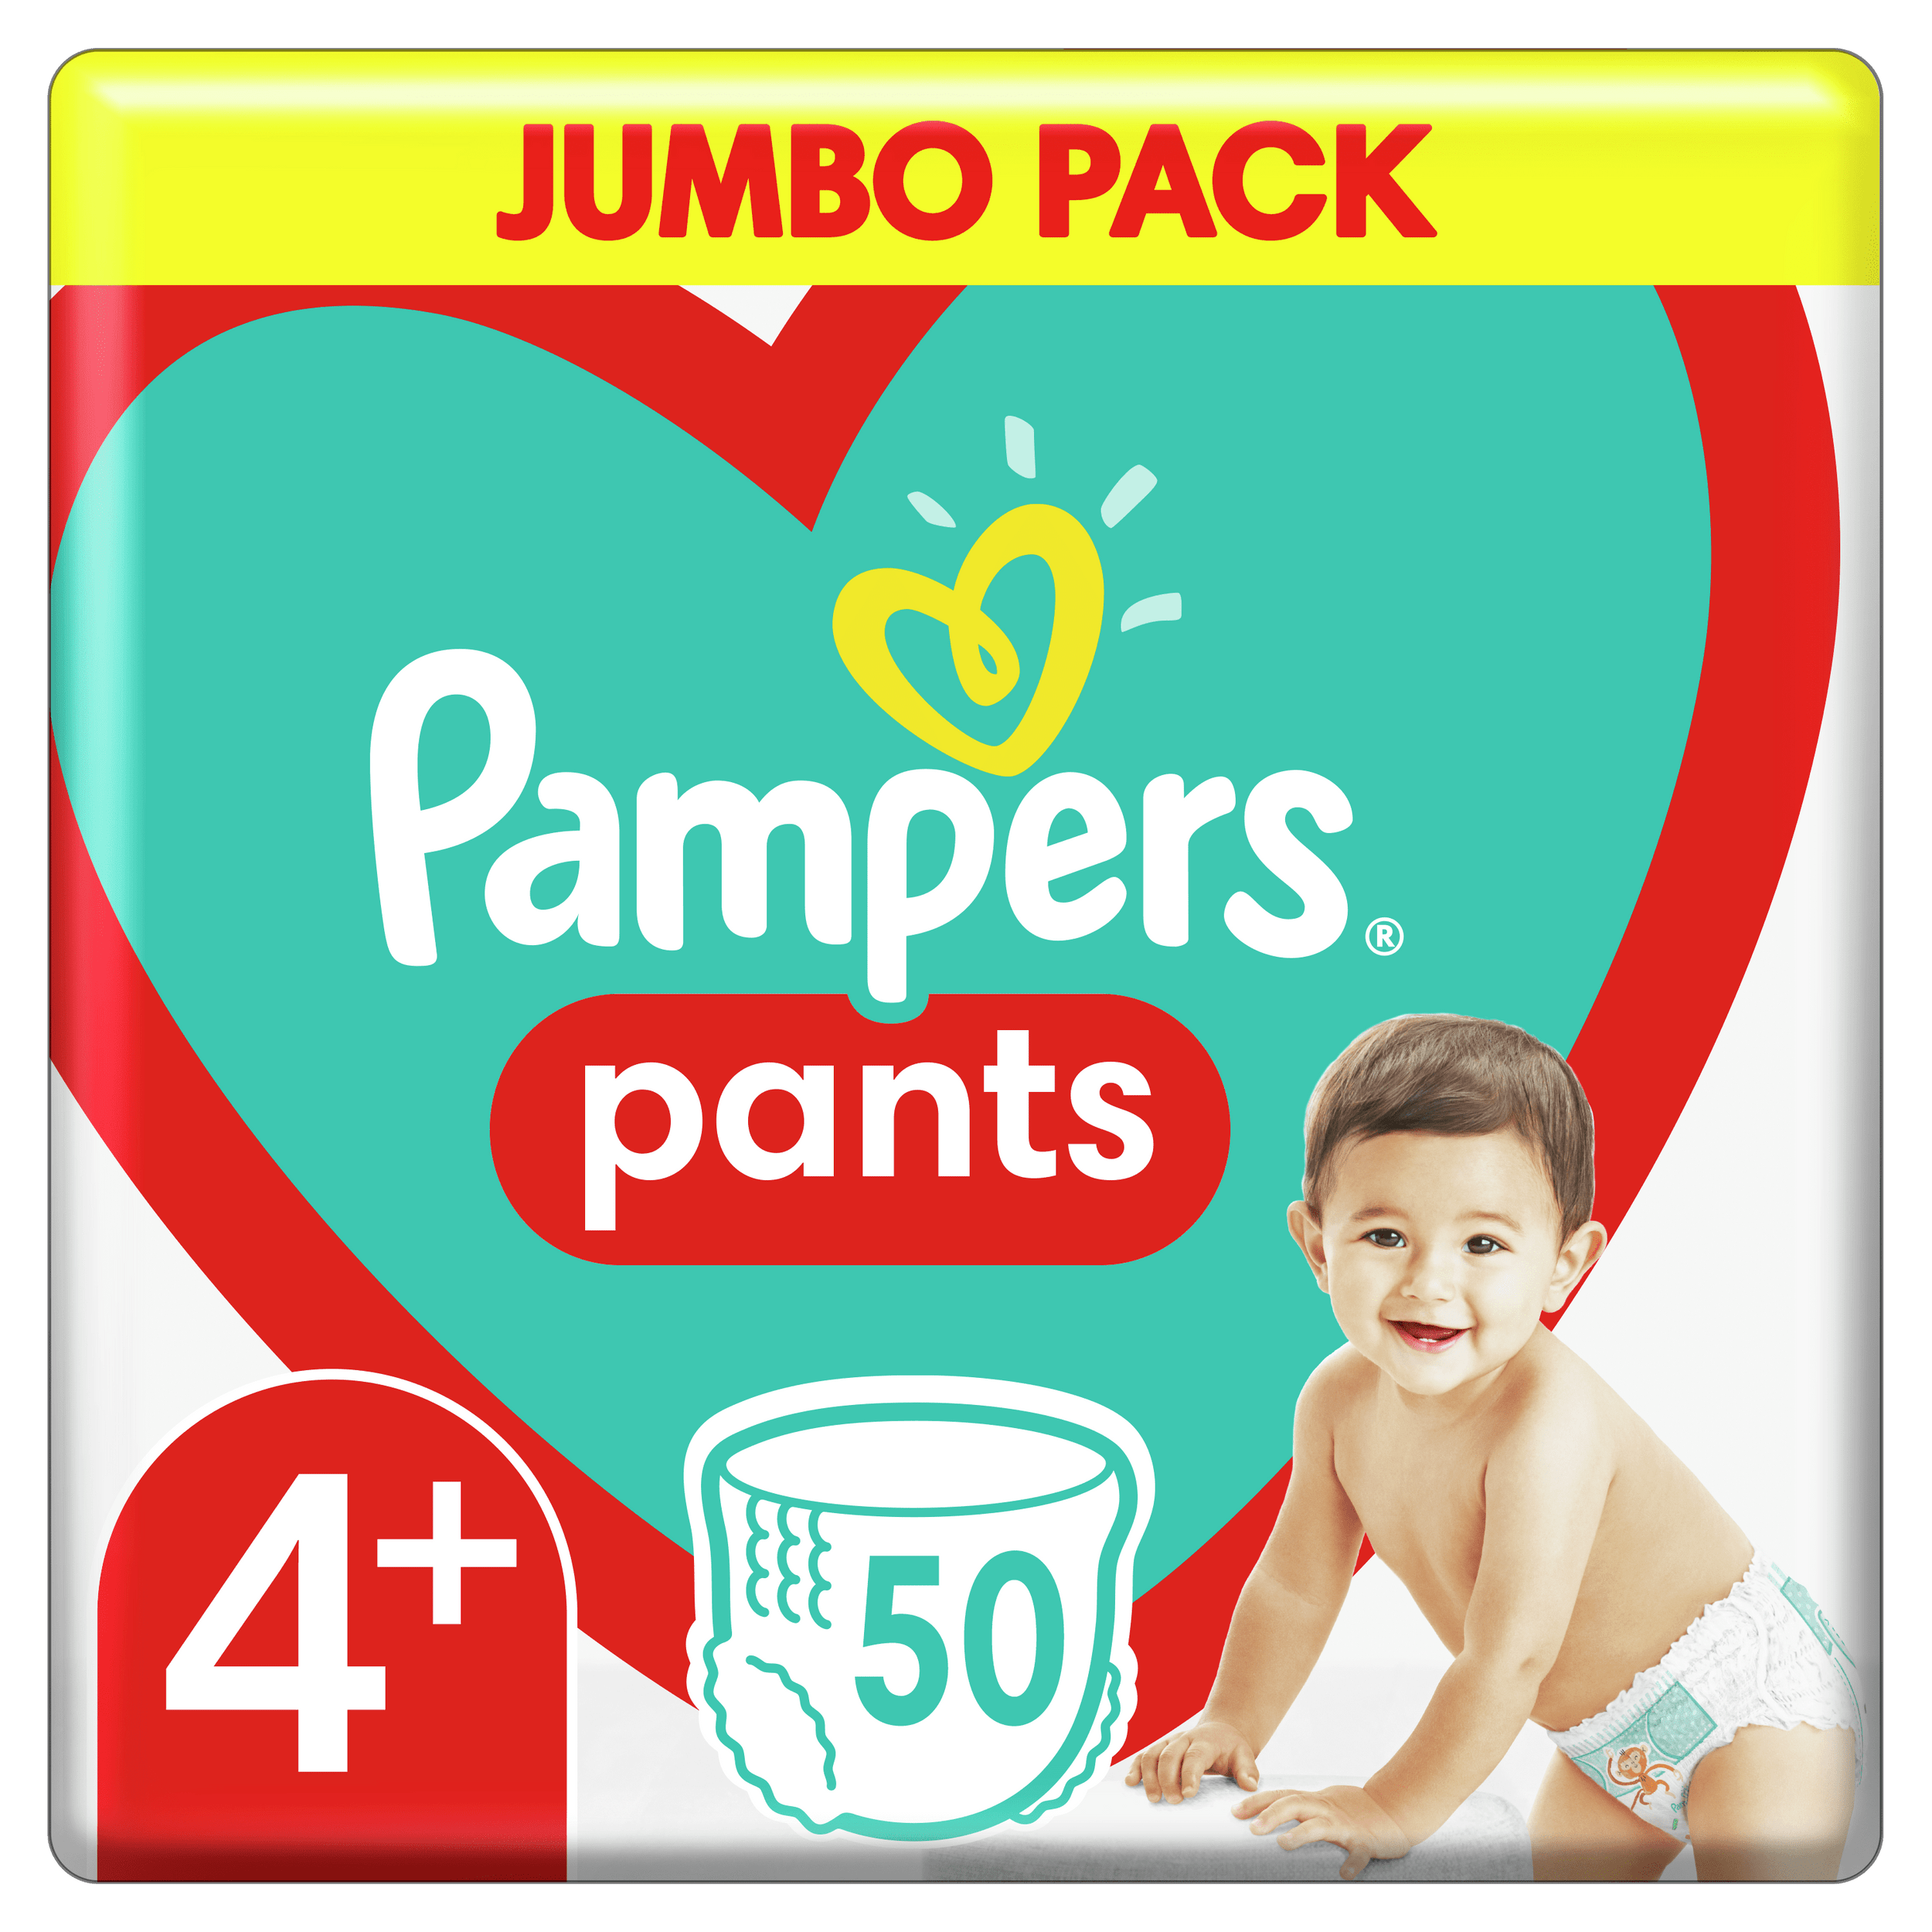 pampers sleap end play